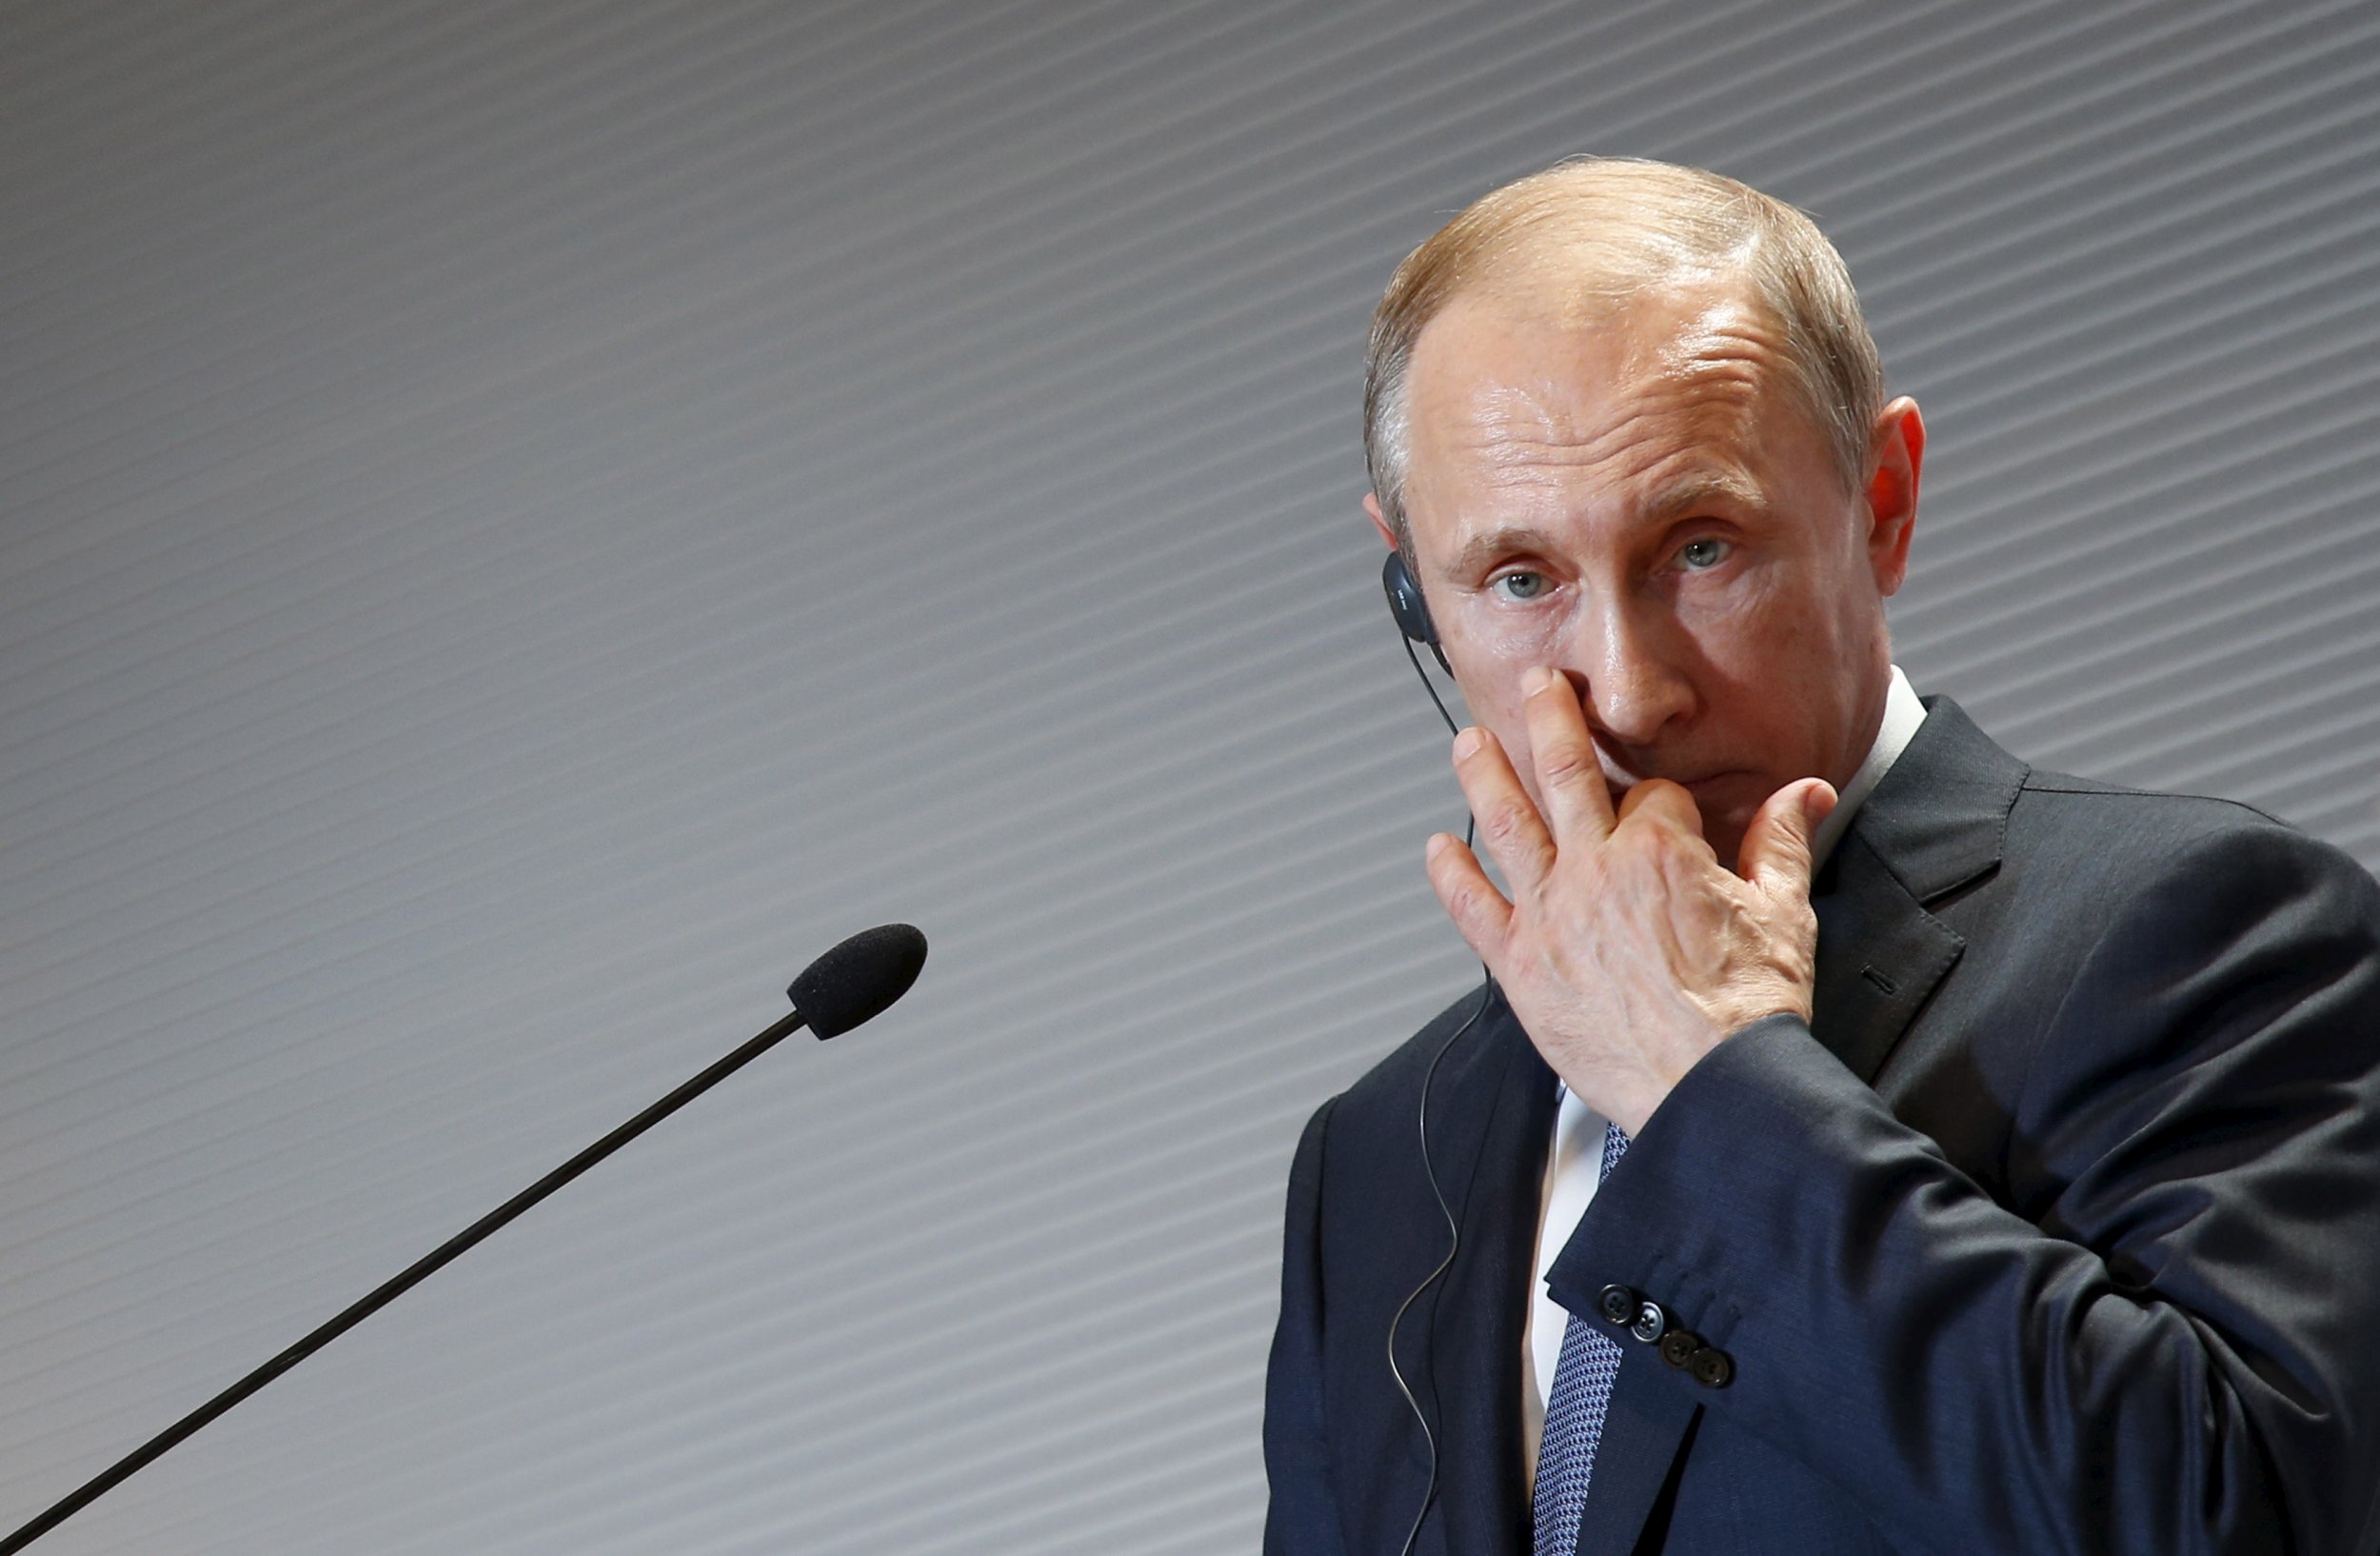 Vladimir Putin at a press conference in Italy